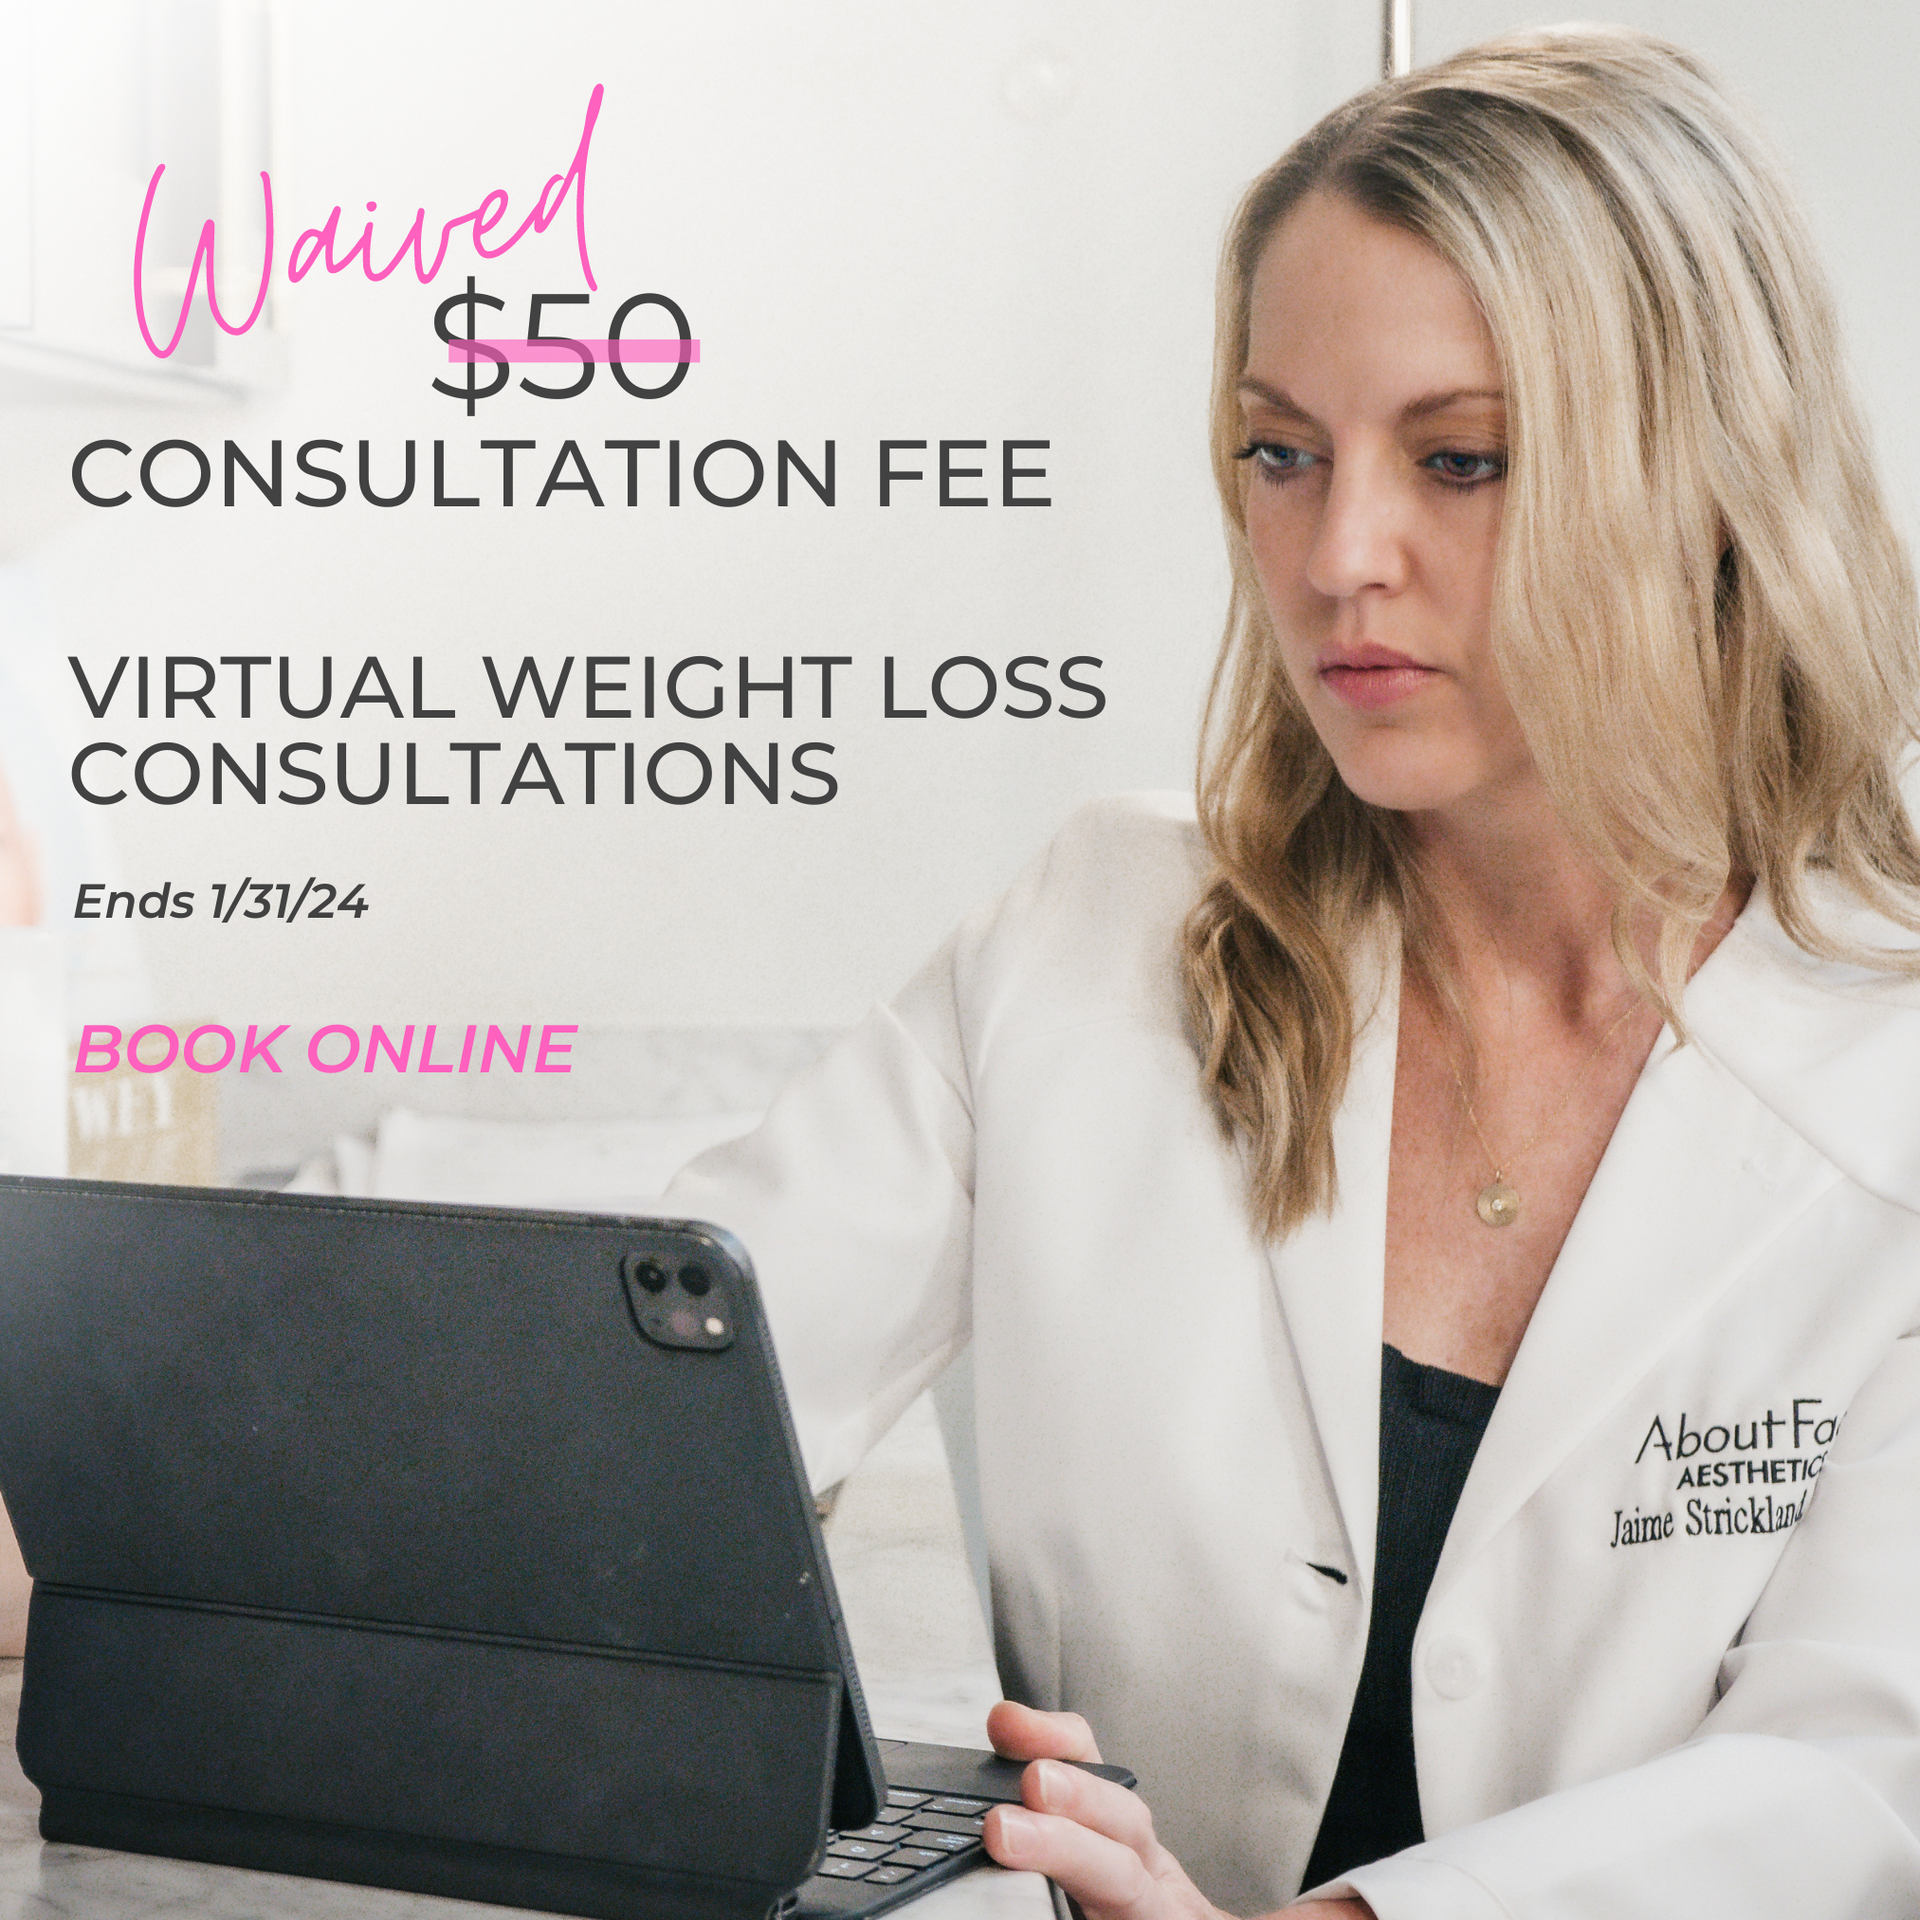 FDA approved semaglutide weight loss injections are not available at about face aesthetics and wellness